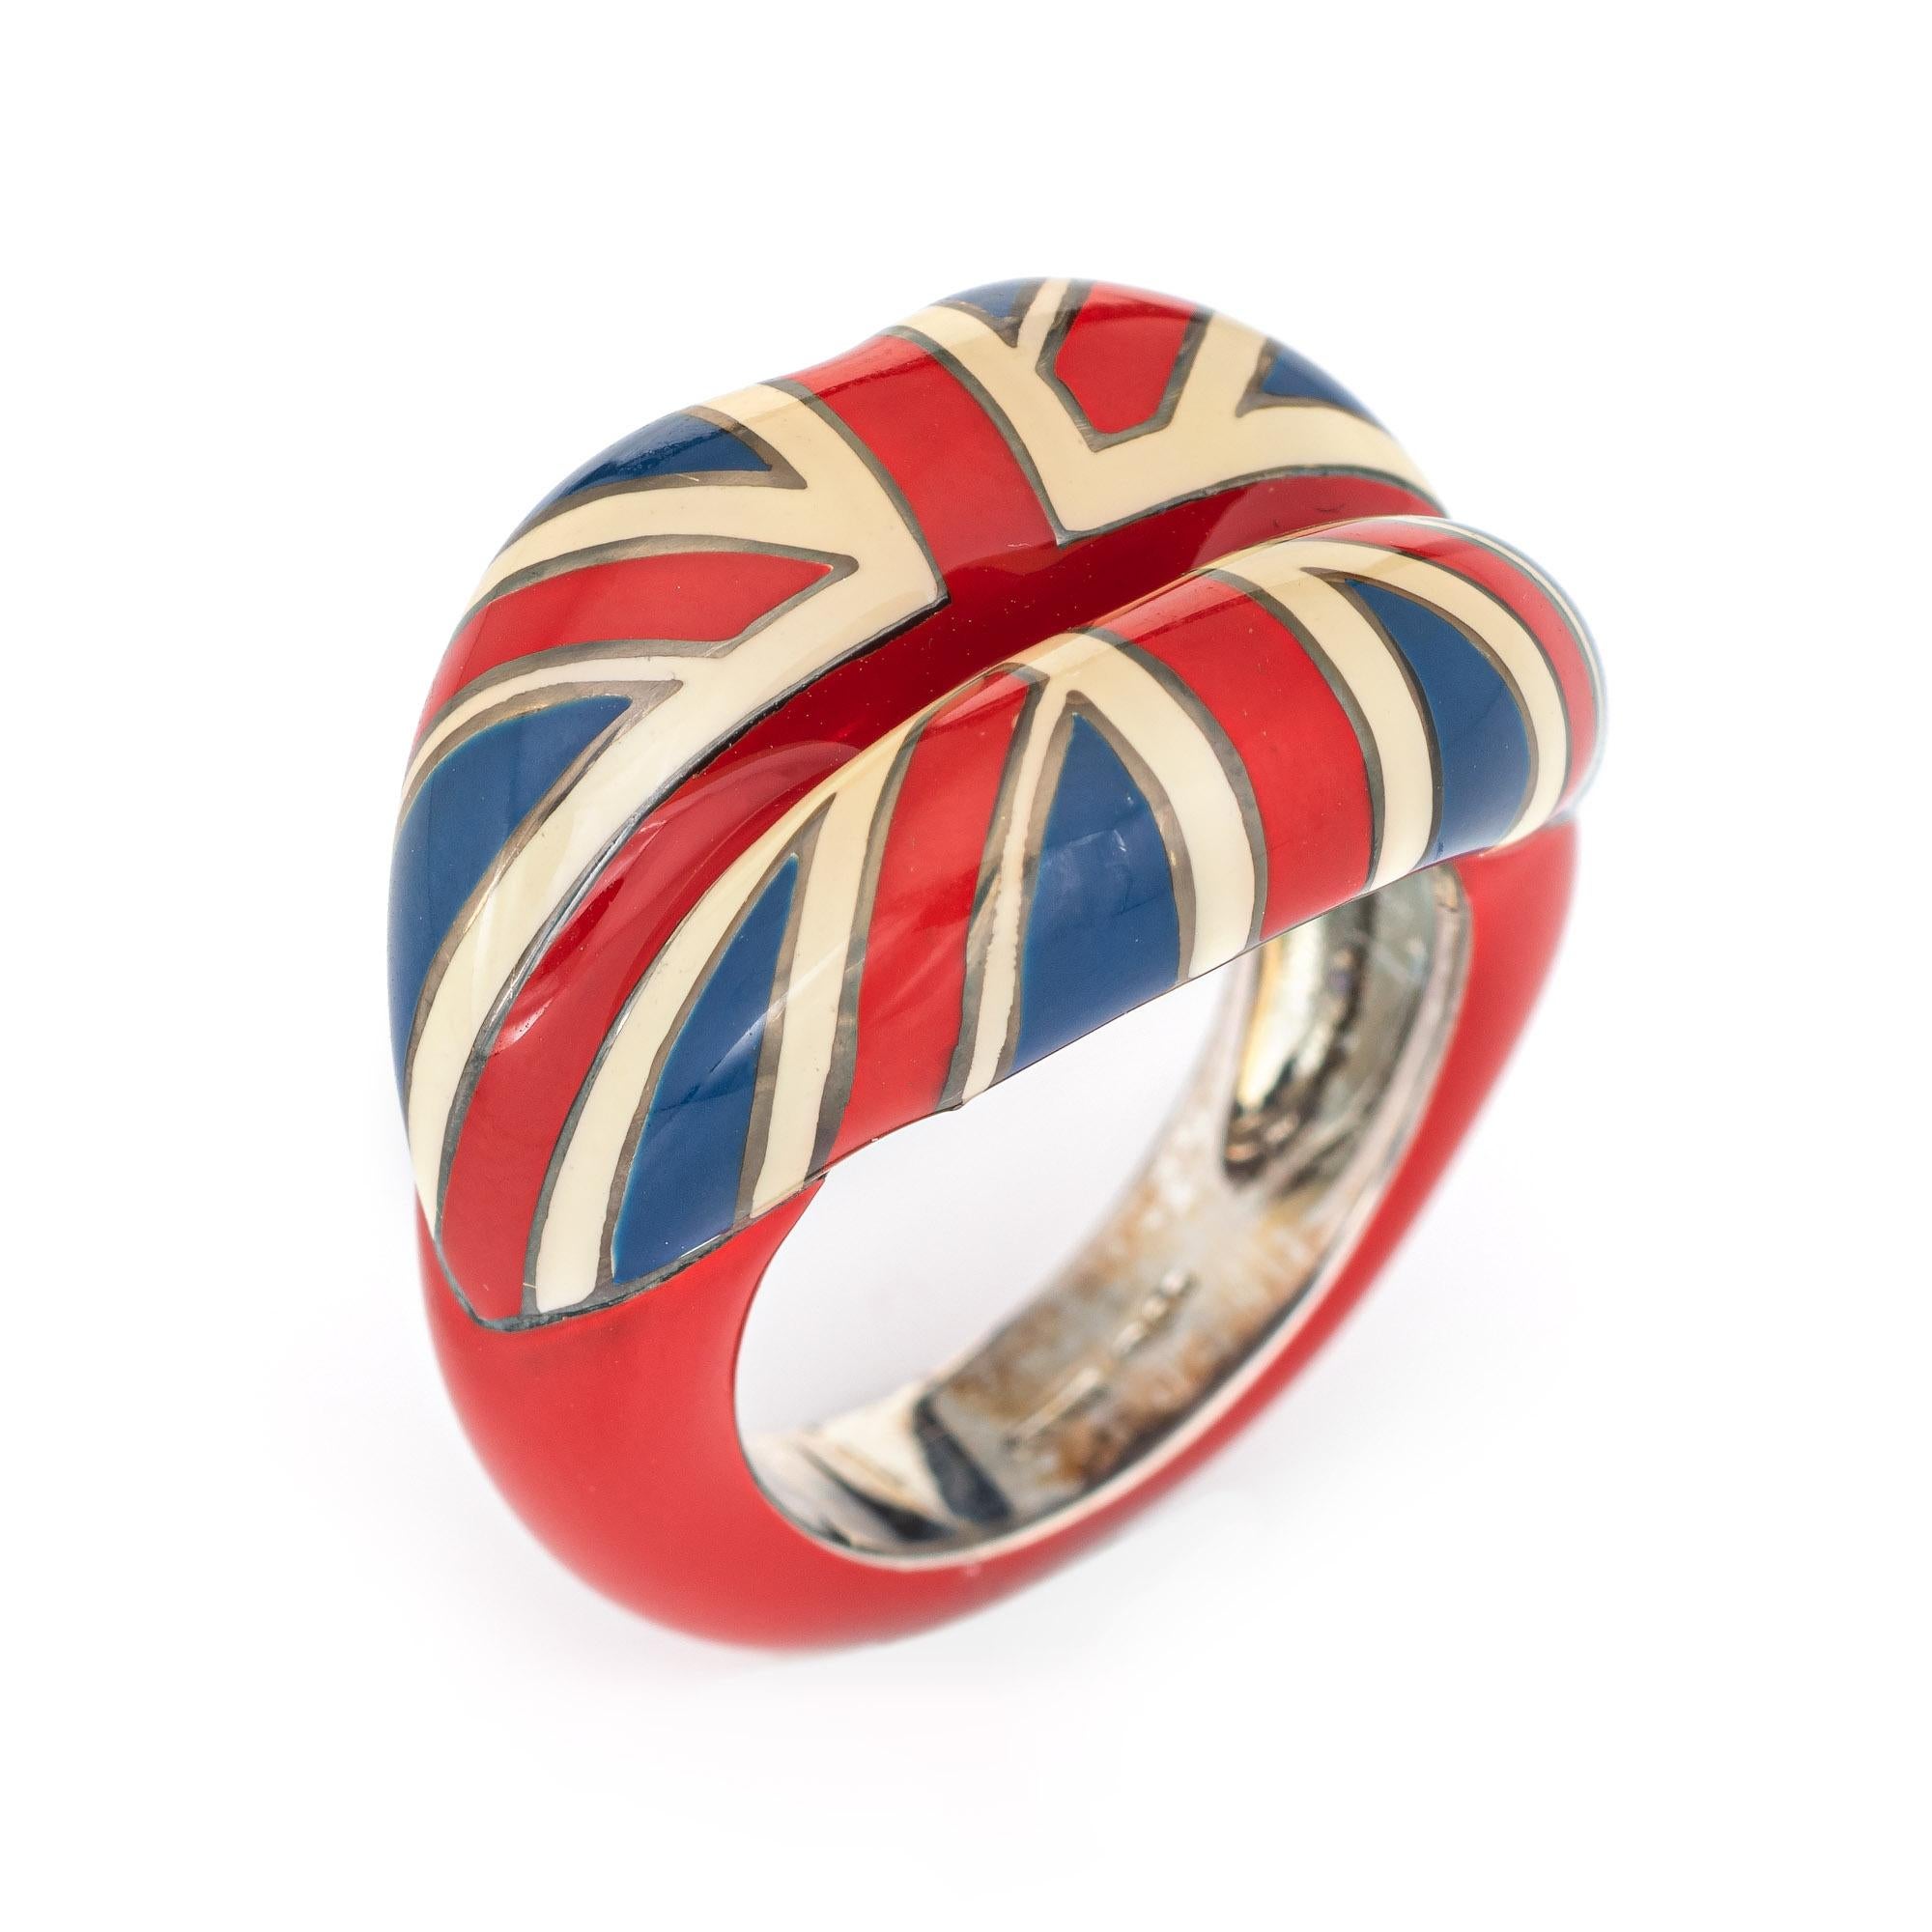 Stylish pre-owned Solange Azagury Partridge ring crafted in sterling silver. 

The 'hotlips' ring by Solange depicts the English Union Jack rendered in red, white and blue enamel. The ring The low rise ring (6mm - 0.23 inches) sits comfortably on